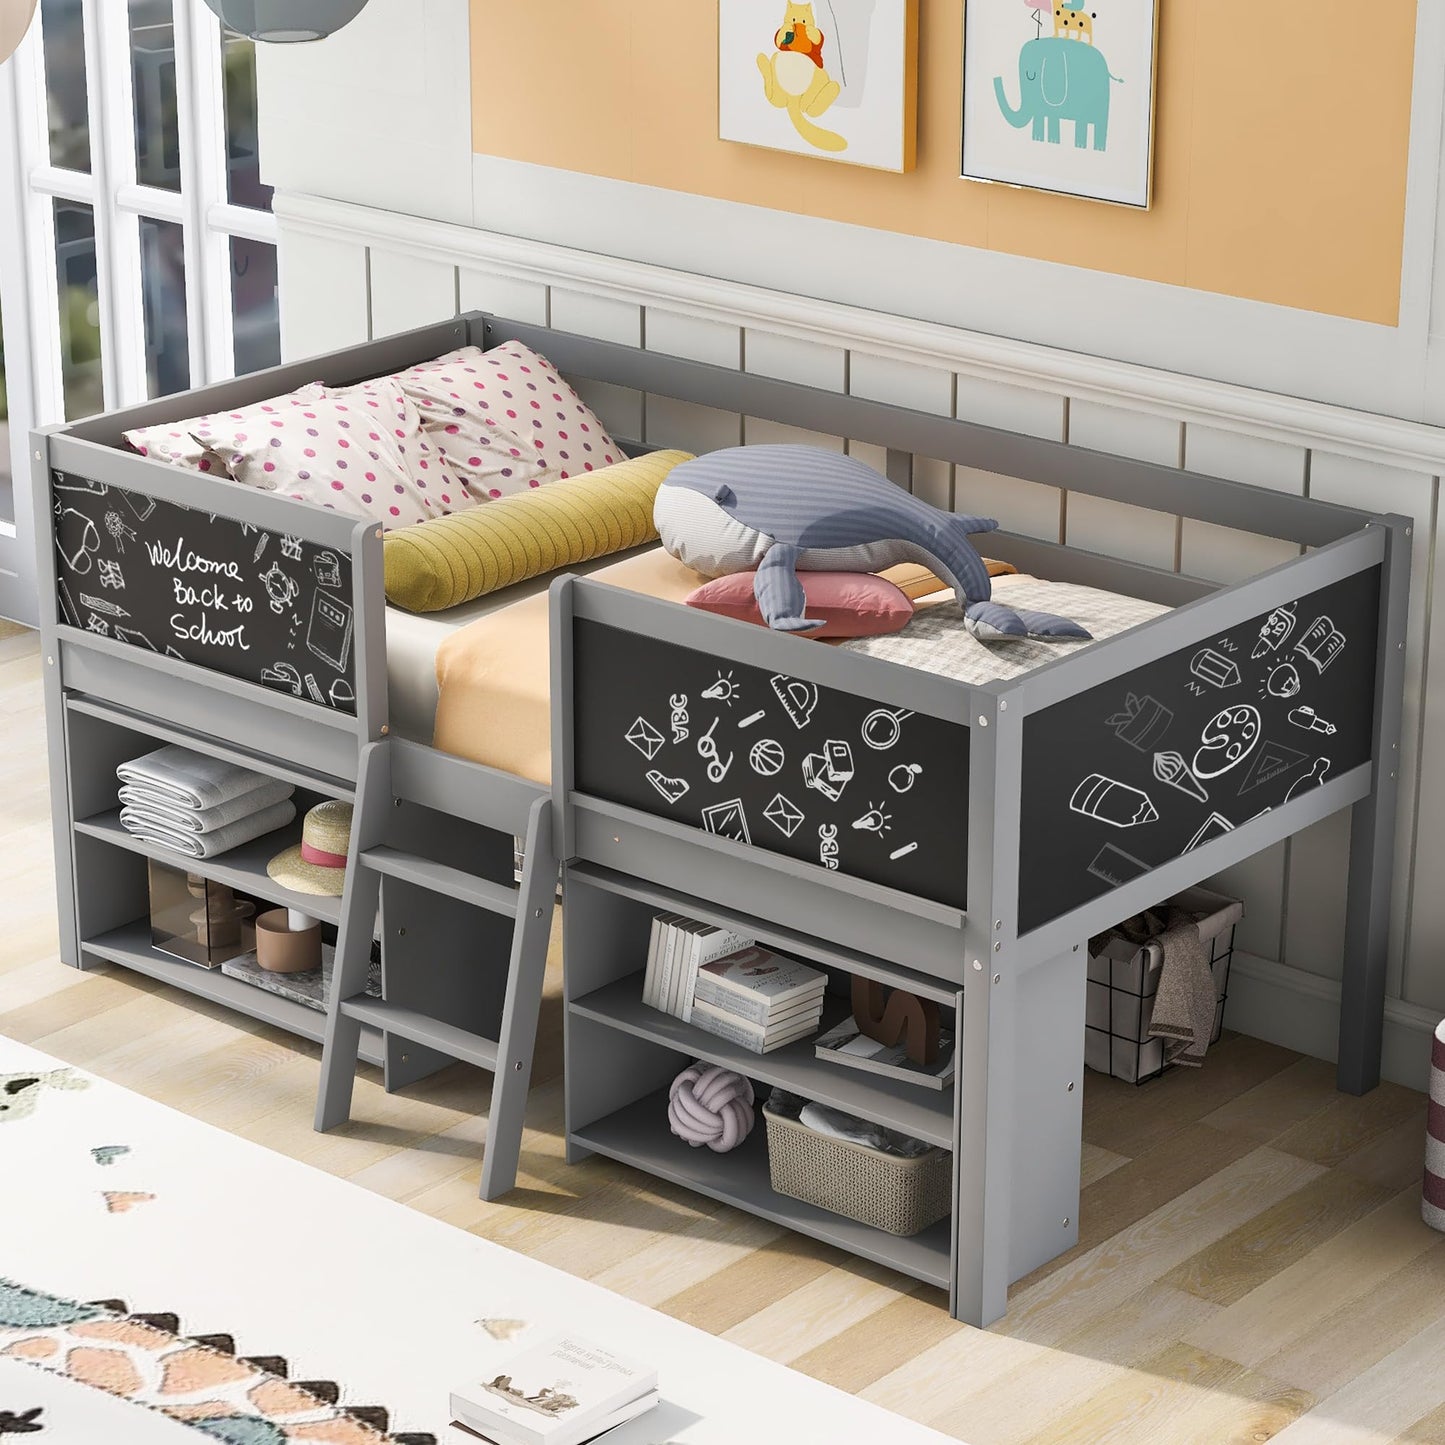 SOFTSEA Twin Size Low Loft Bed, Solid Wood Loft Bed Frame with 2 Movable Shelves and Ladder, Low Loft Bed with Decorative Guardrail and Chalkboard for Boys and Girls, Grey